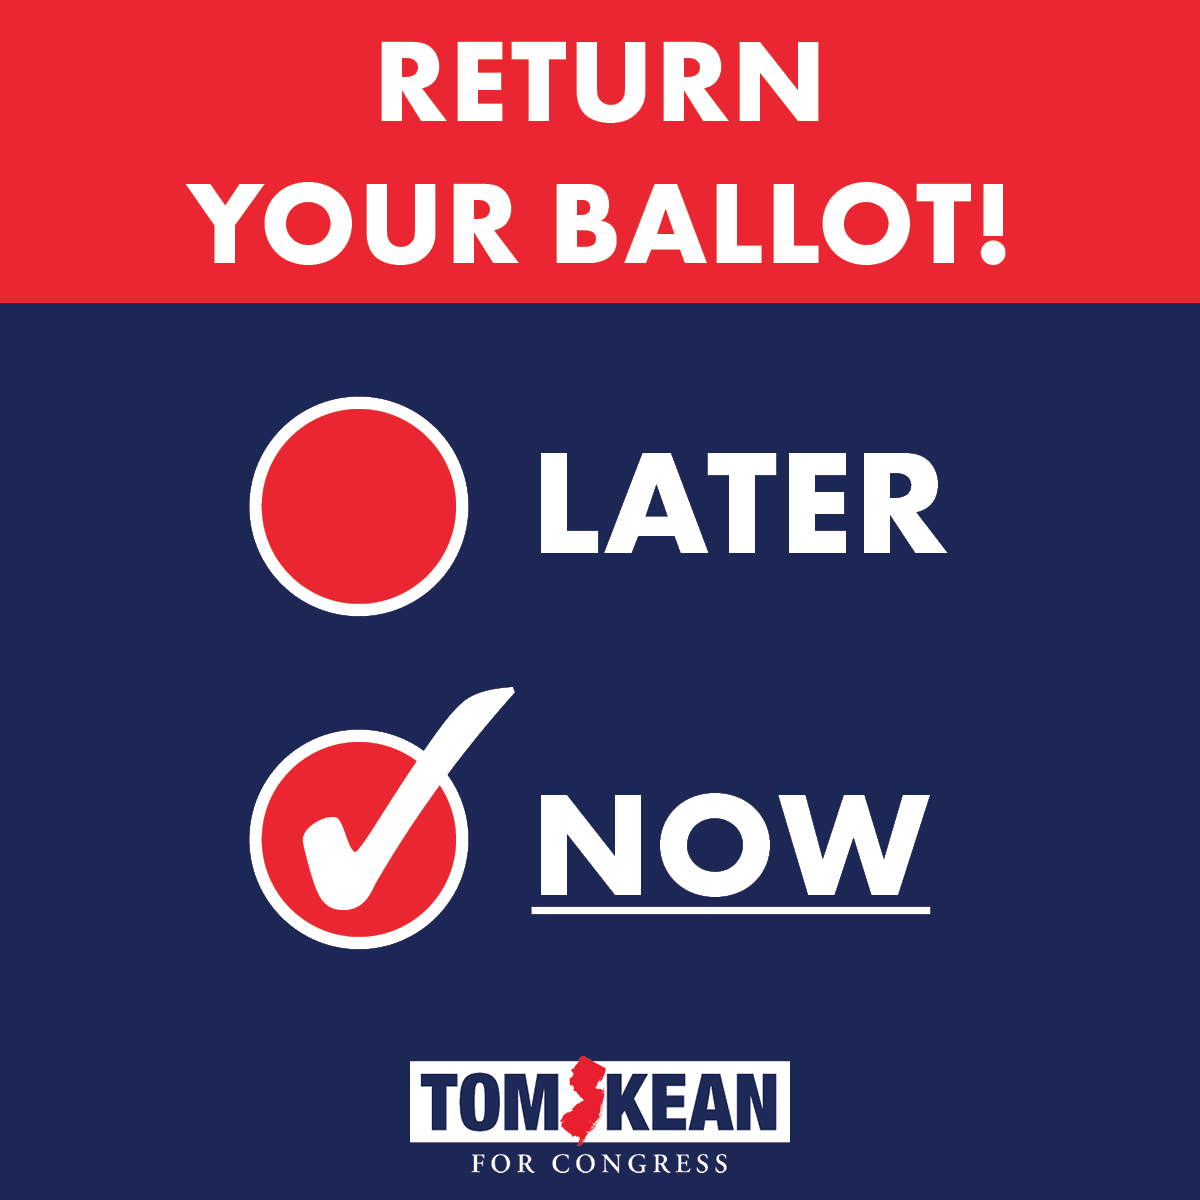 REMINDER: Voting by mail is safe and secure. Anything can happen on Election Day so bank your vote early - return your VBM now! 📬 Questions? Visit: nj.gov/state/election…